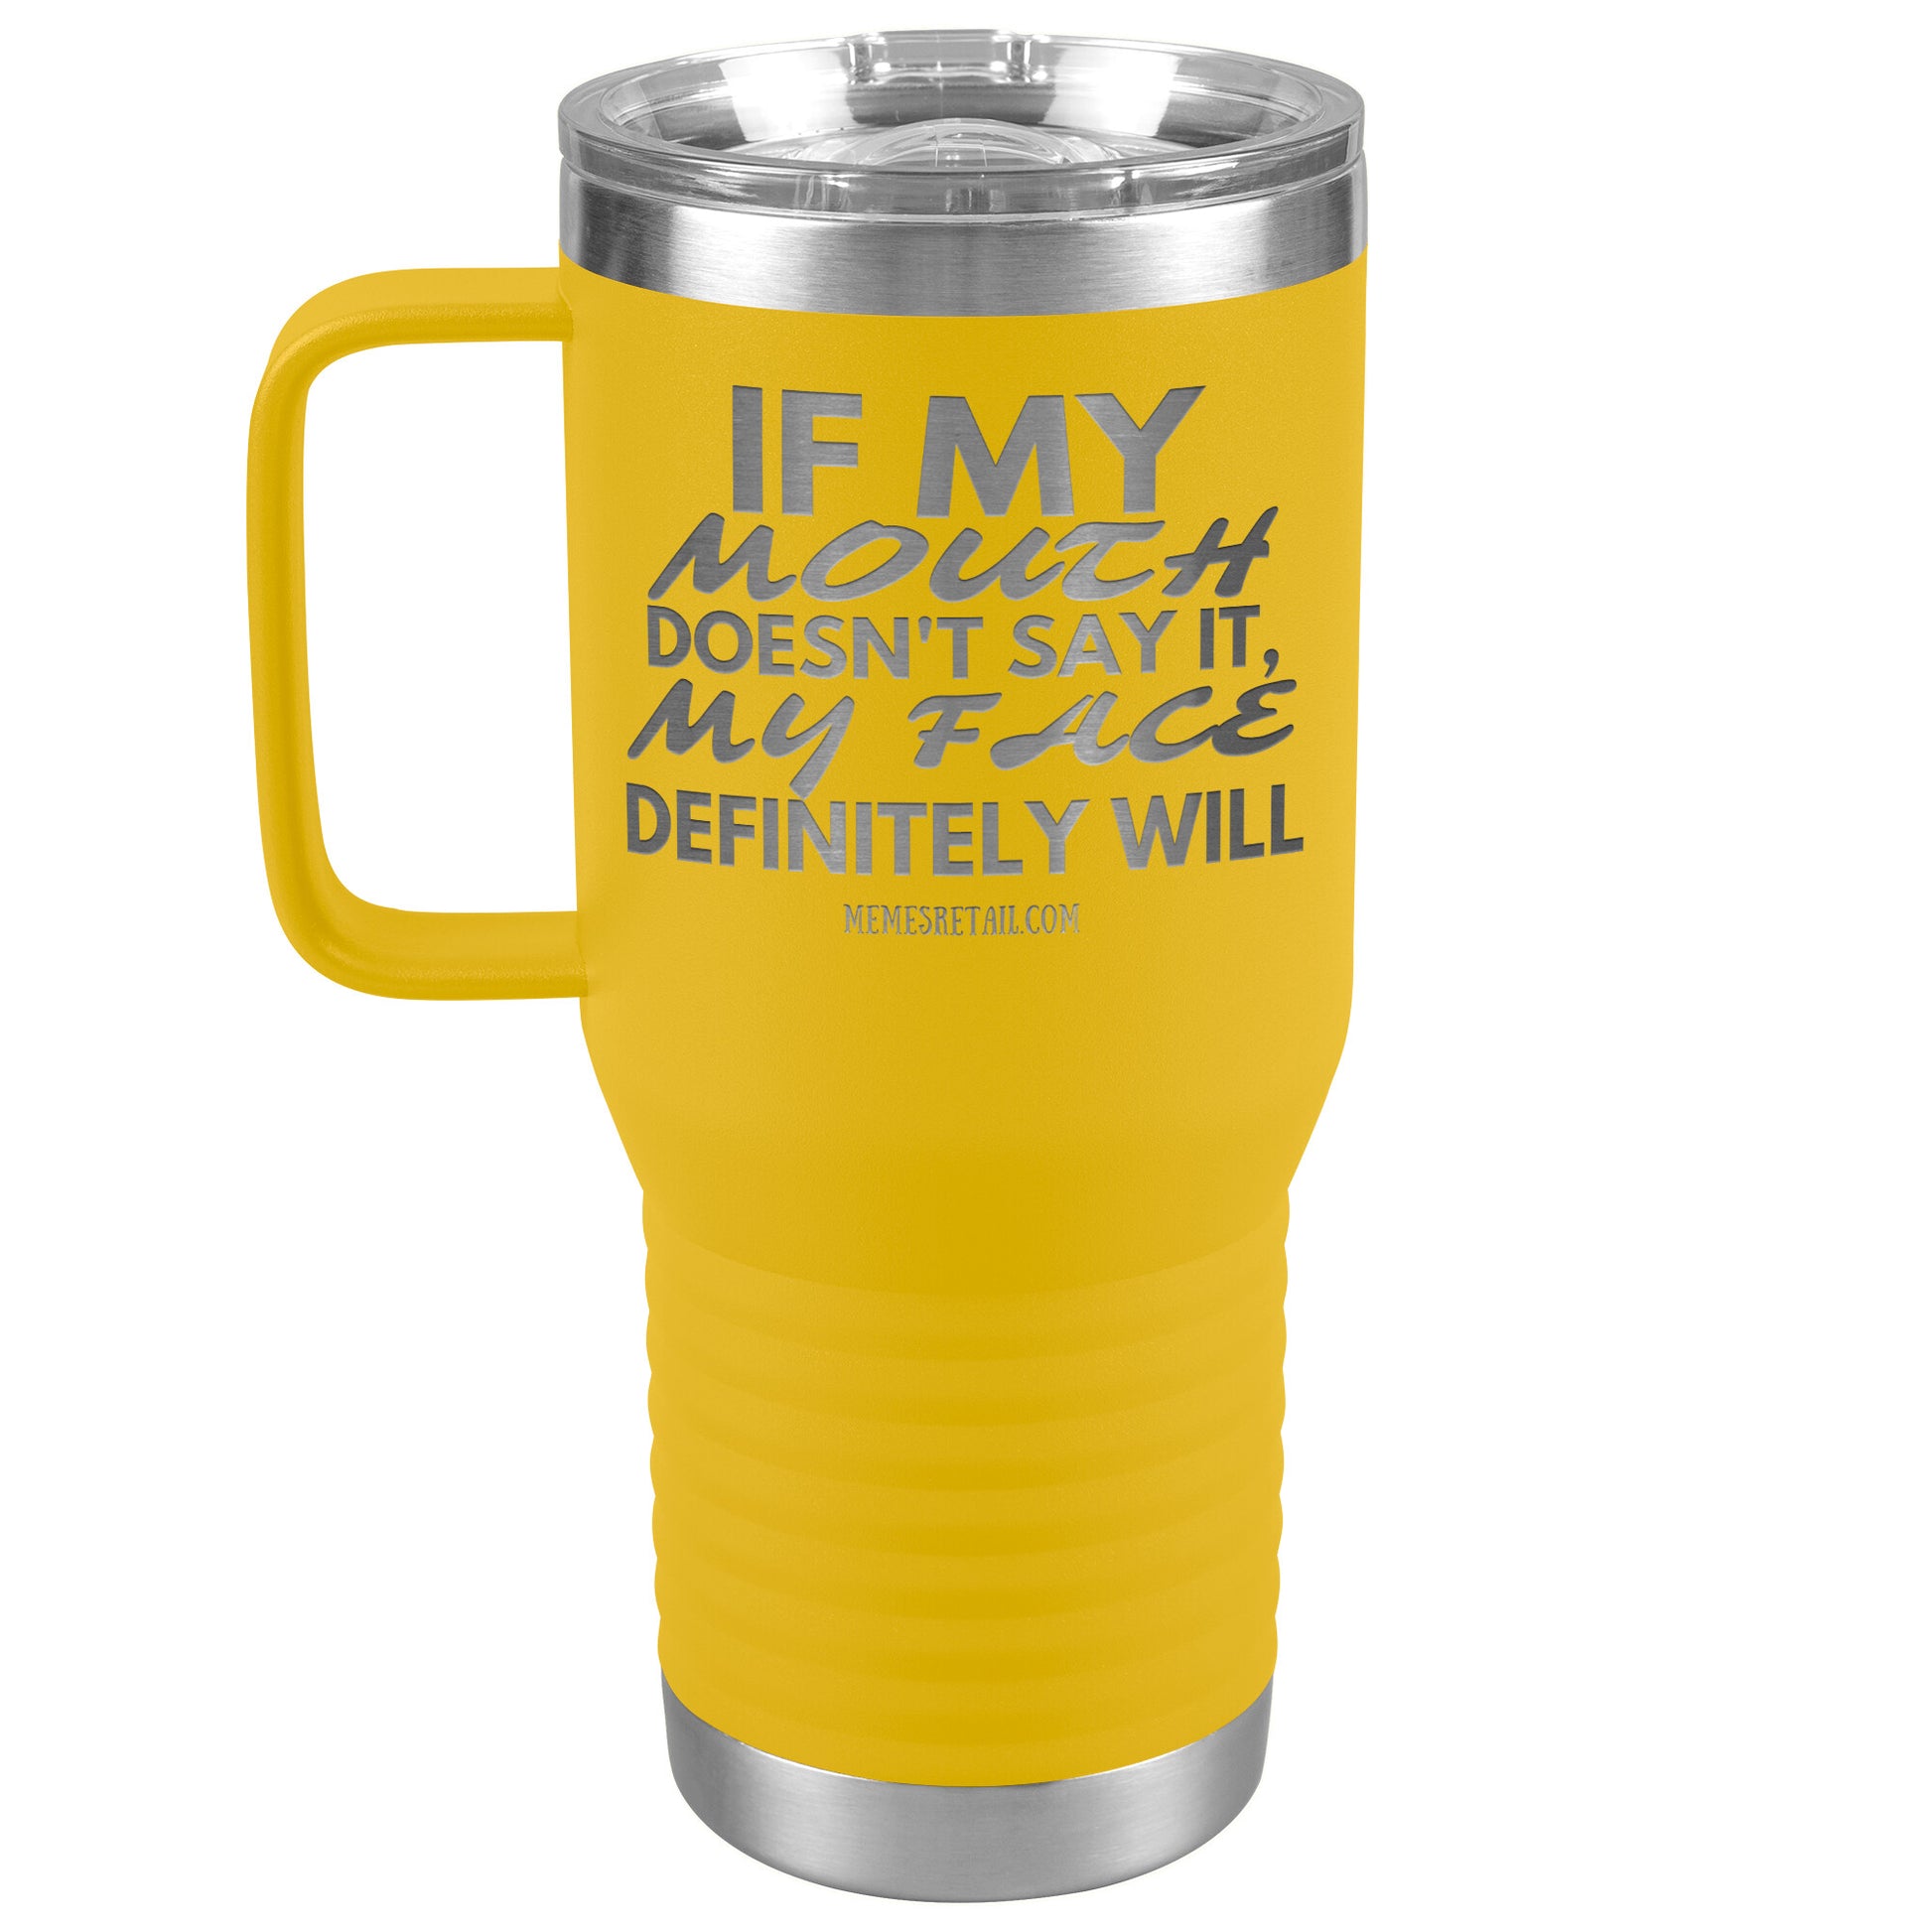 If my mouth doesn't say it, my face definitely will Tumblers, 20oz Travel Tumbler / Yellow - MemesRetail.com